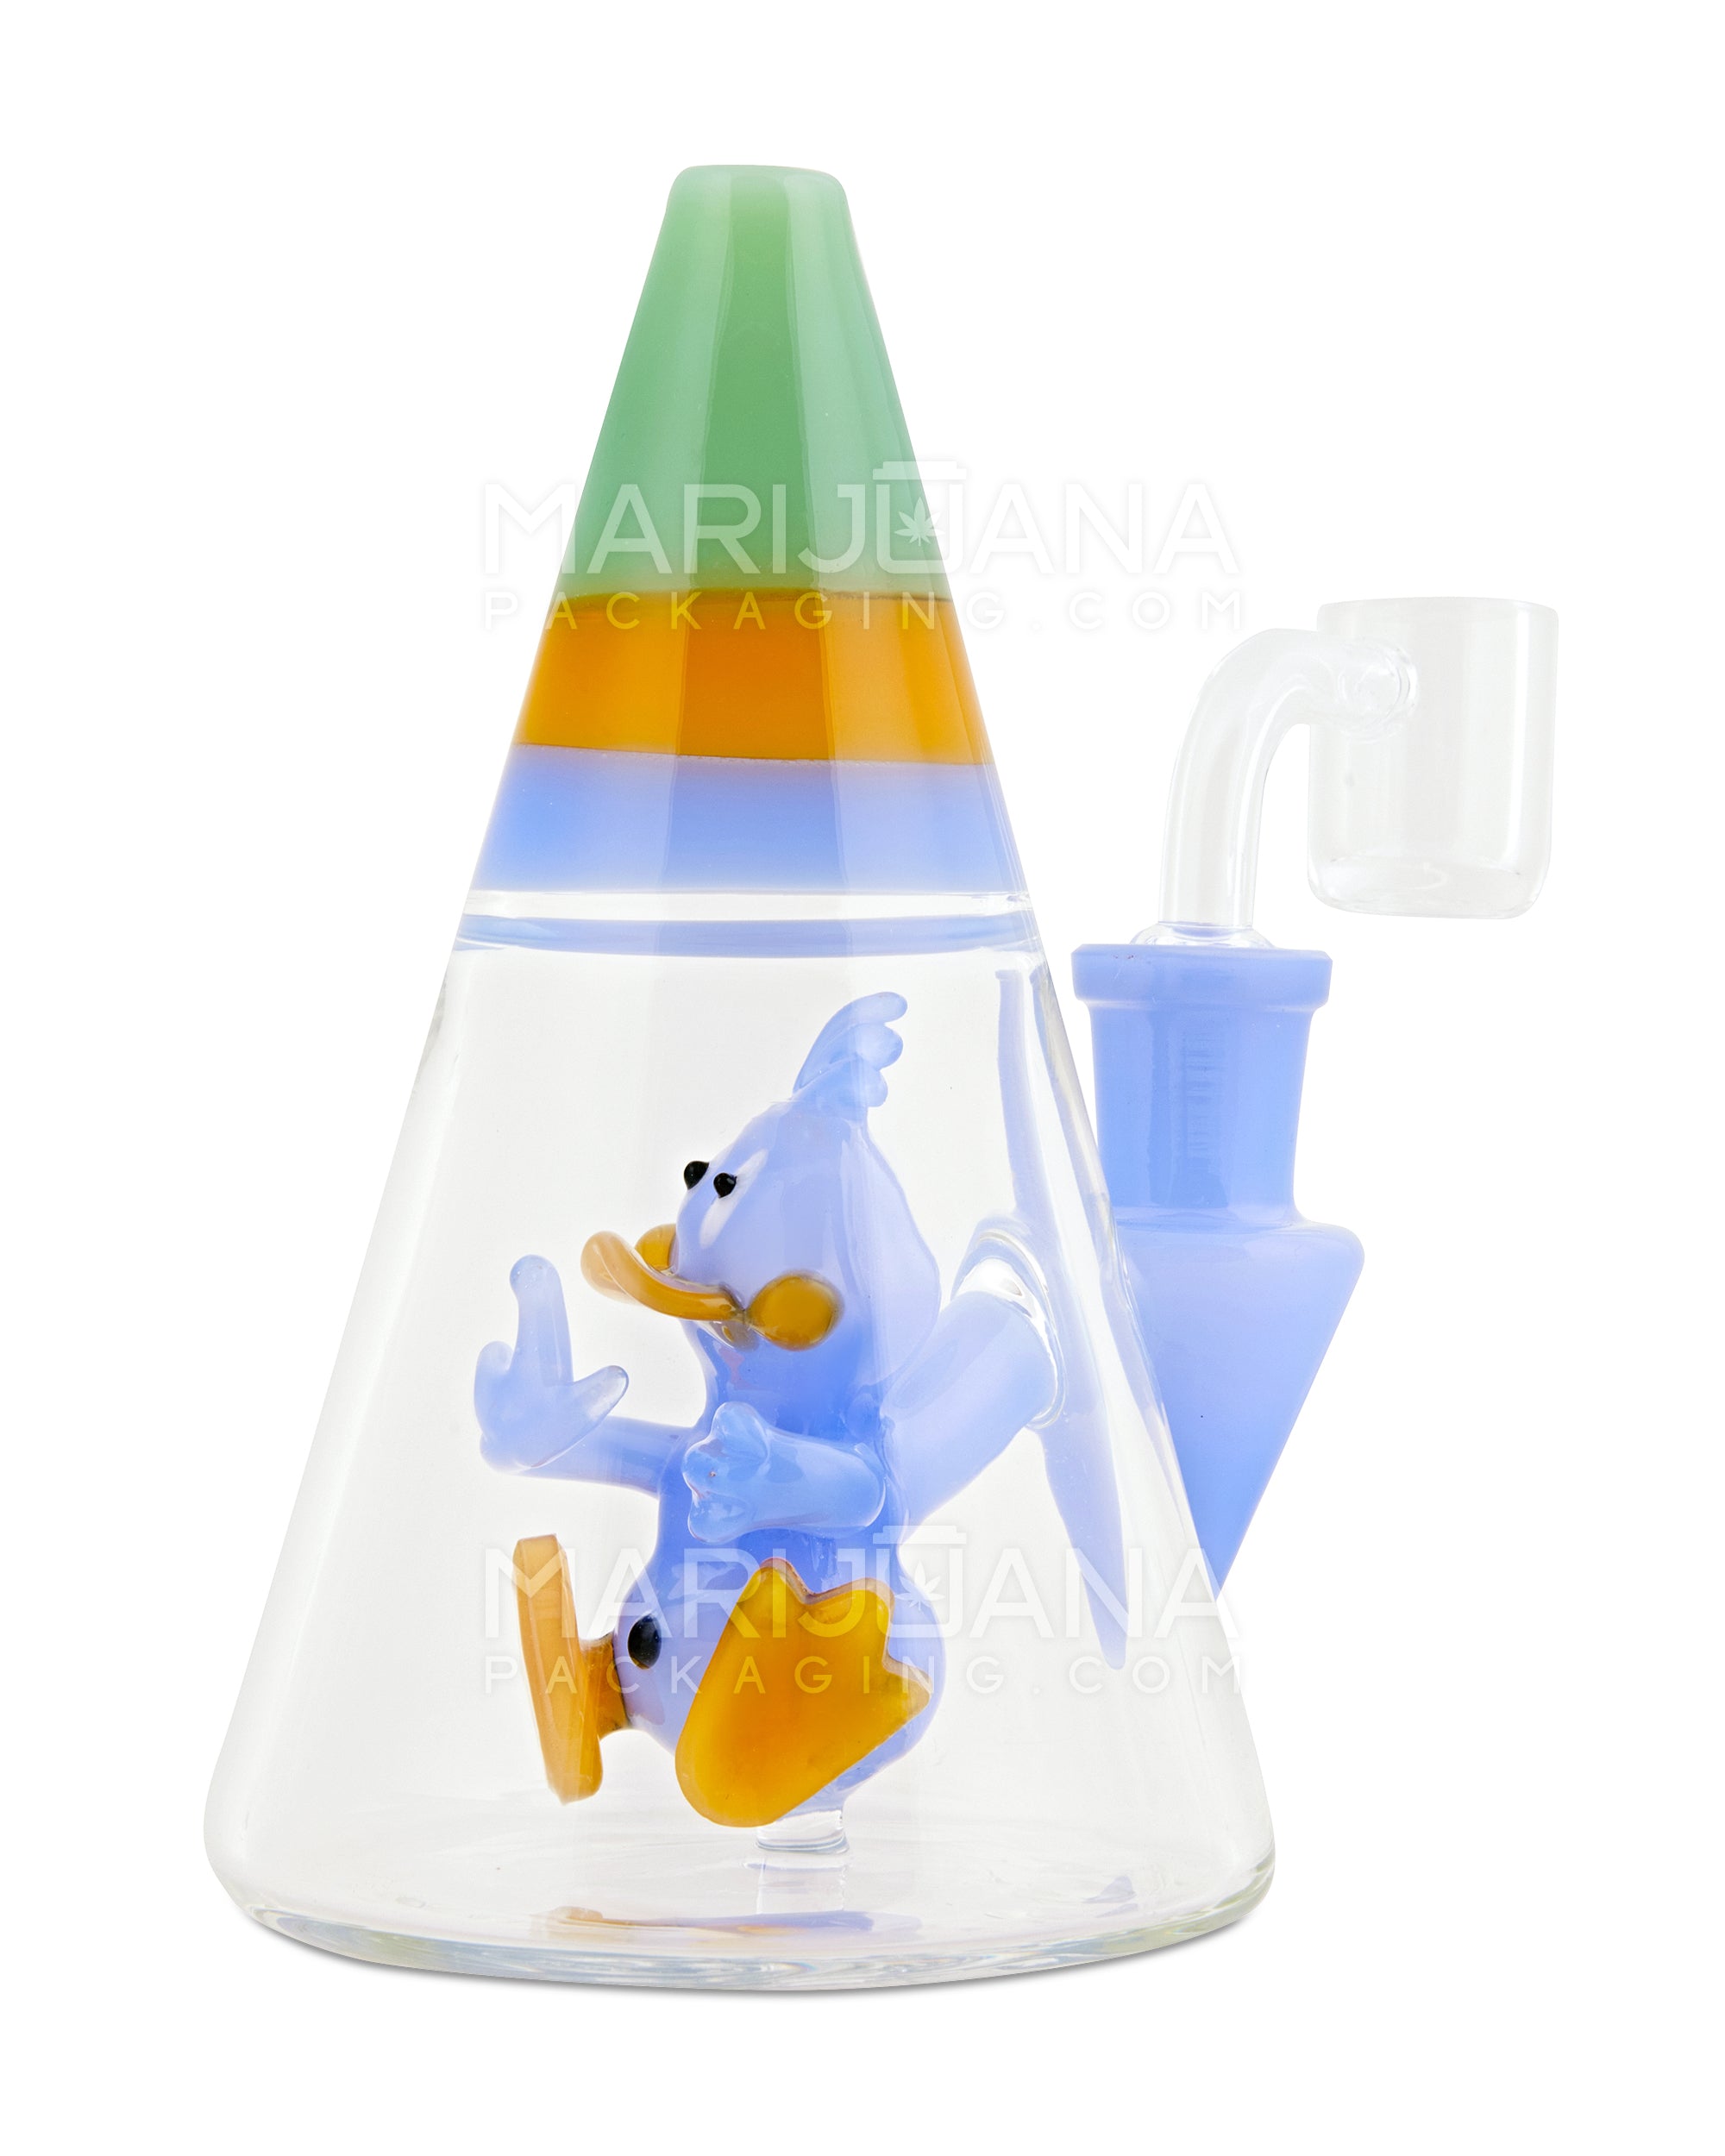 USA Glass | Glass Cone Dab Rig w/ 2 Hole Duck Perc | 5.5in Tall - 14mm Banger - Assorted